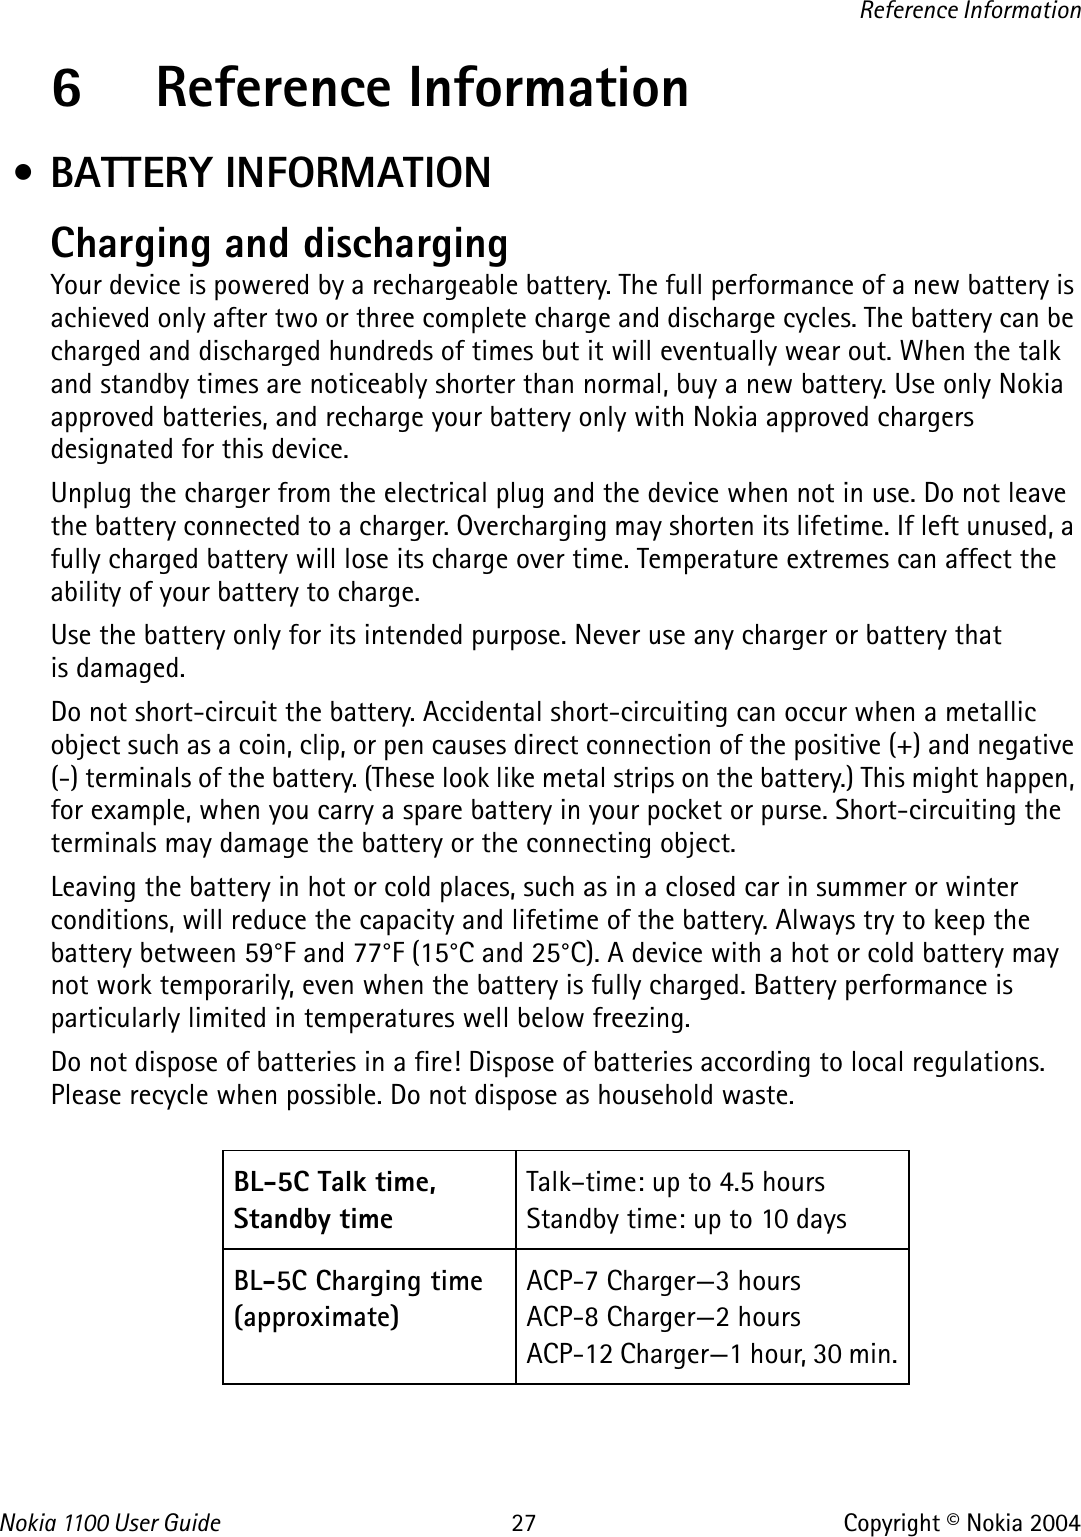 Nokia 110 0  User Guide 27 Copyright © Nokia 2004Reference Information6 Reference Information • BATTERY INFORMATIONCharging and dischargingYour device is powered by a rechargeable battery. The full performance of a new battery is achieved only after two or three complete charge and discharge cycles. The battery can be charged and discharged hundreds of times but it will eventually wear out. When the talk and standby times are noticeably shorter than normal, buy a new battery. Use only Nokia approved batteries, and recharge your battery only with Nokia approved chargers designated for this device.Unplug the charger from the electrical plug and the device when not in use. Do not leave the battery connected to a charger. Overcharging may shorten its lifetime. If left unused, a fully charged battery will lose its charge over time. Temperature extremes can affect the ability of your battery to charge.Use the battery only for its intended purpose. Never use any charger or battery that is damaged.Do not short-circuit the battery. Accidental short-circuiting can occur when a metallic object such as a coin, clip, or pen causes direct connection of the positive (+) and negative (-) terminals of the battery. (These look like metal strips on the battery.) This might happen, for example, when you carry a spare battery in your pocket or purse. Short-circuiting the terminals may damage the battery or the connecting object.Leaving the battery in hot or cold places, such as in a closed car in summer or winter conditions, will reduce the capacity and lifetime of the battery. Always try to keep the battery between 59°F and 77°F (15°C and 25°C). A device with a hot or cold battery may not work temporarily, even when the battery is fully charged. Battery performance is particularly limited in temperatures well below freezing.Do not dispose of batteries in a fire! Dispose of batteries according to local regulations. Please recycle when possible. Do not dispose as household waste.BL-5C Talk time, Standby timeTalk–time: up to 4.5 hoursStandby time: up to 10 daysBL-5C Charging time(approximate)ACP-7 Charger—3 hoursACP-8 Charger—2 hoursACP-12 Charger—1 hour, 30 min.